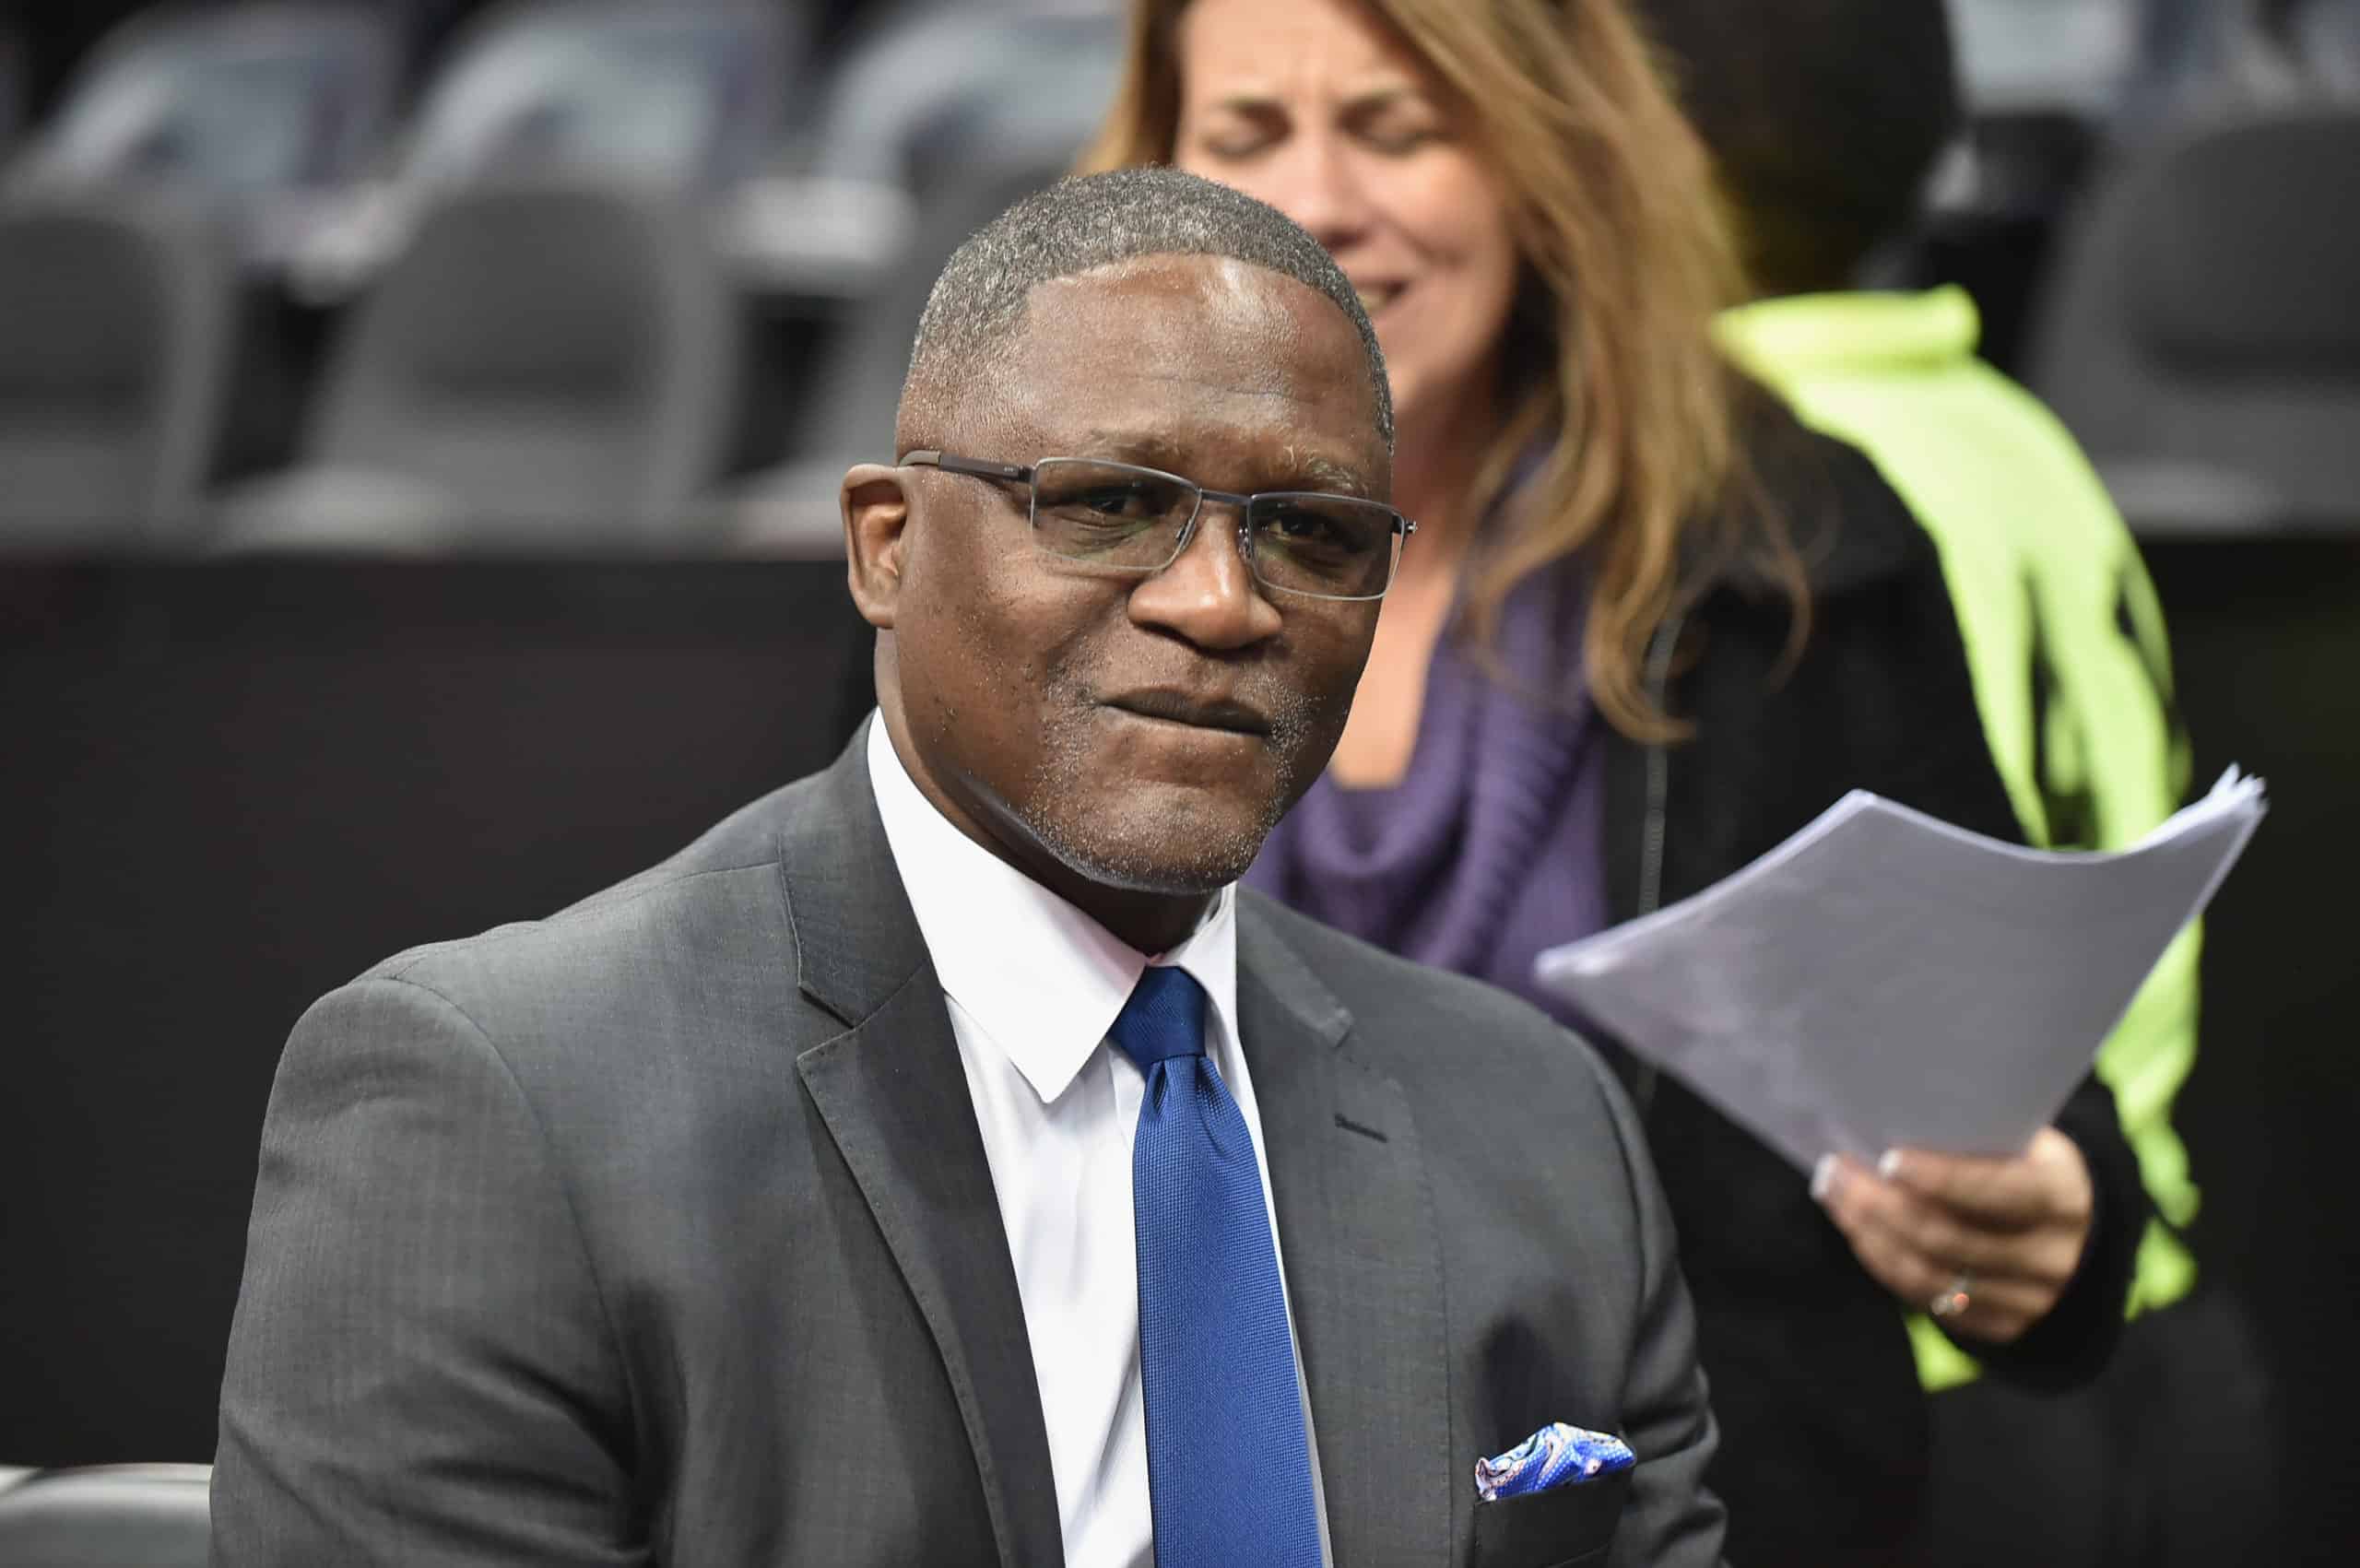 Dominique Wilkins accused Atlanta restaurant Le Bilboquet of racism and they later issued an apology after facing backlash.